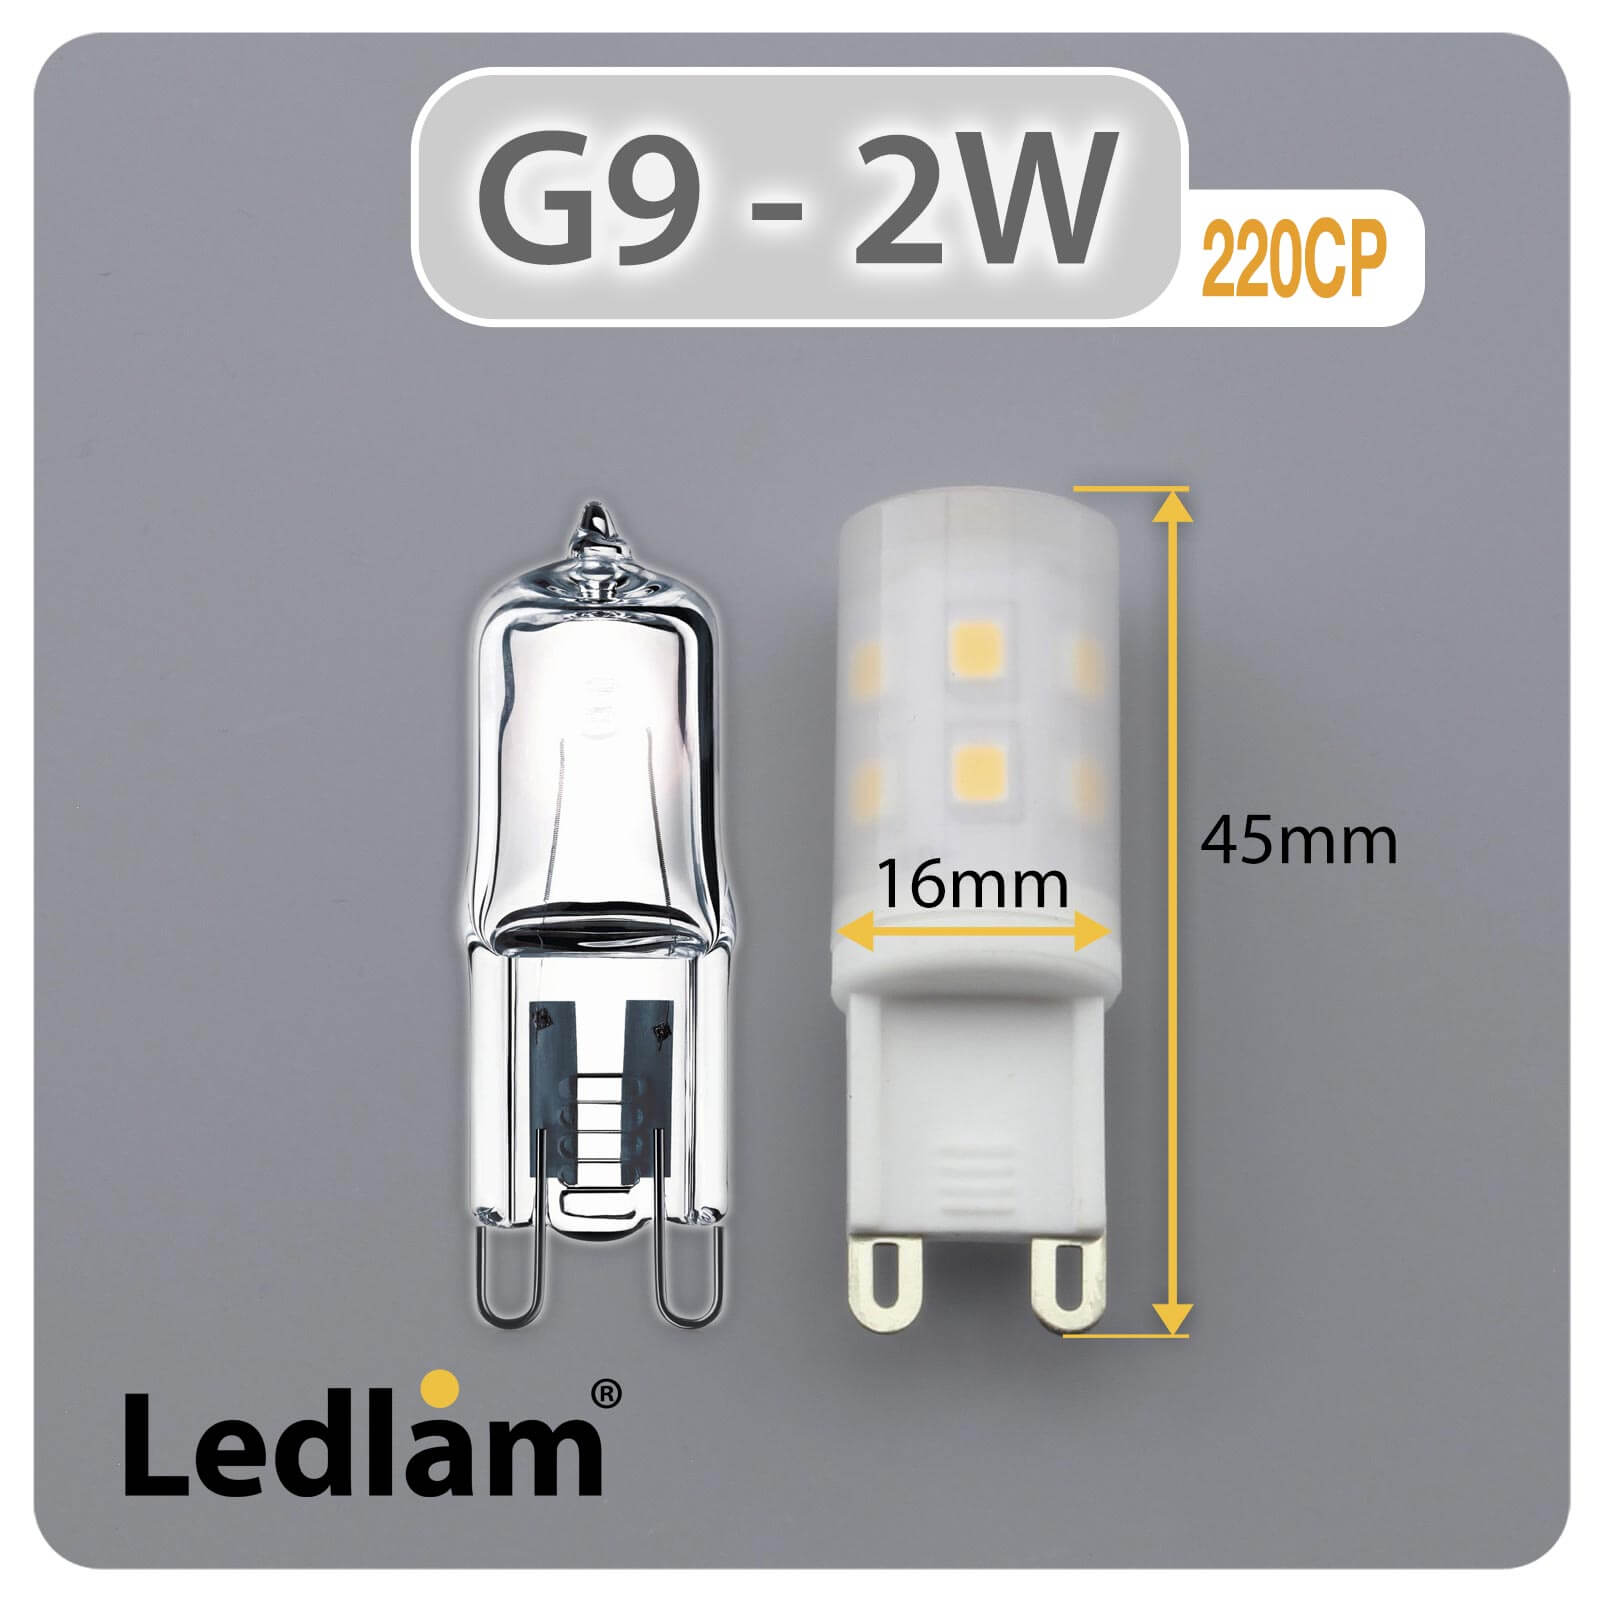 2 capsules LED G9 3,1W=28W blanc froid